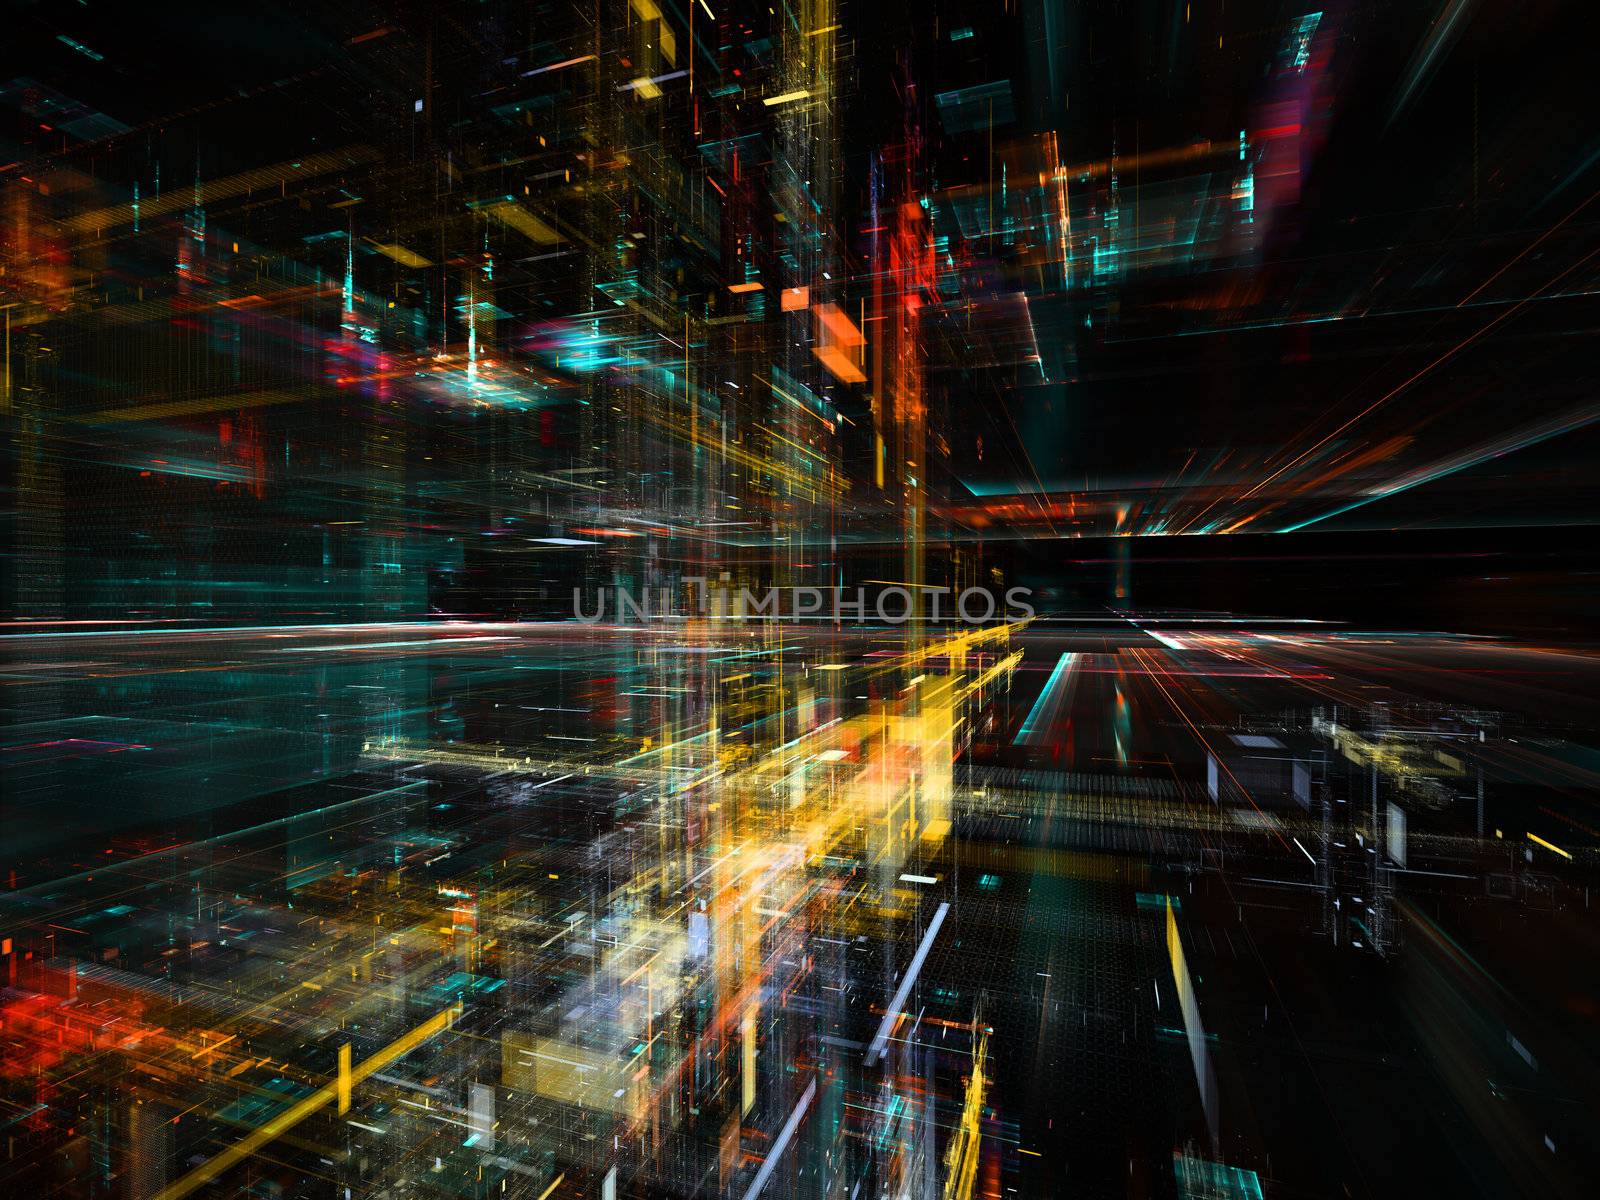 Digital Perspectives series. Abstract design made of light grids and fractal elements on the subject of business, science, education and technology